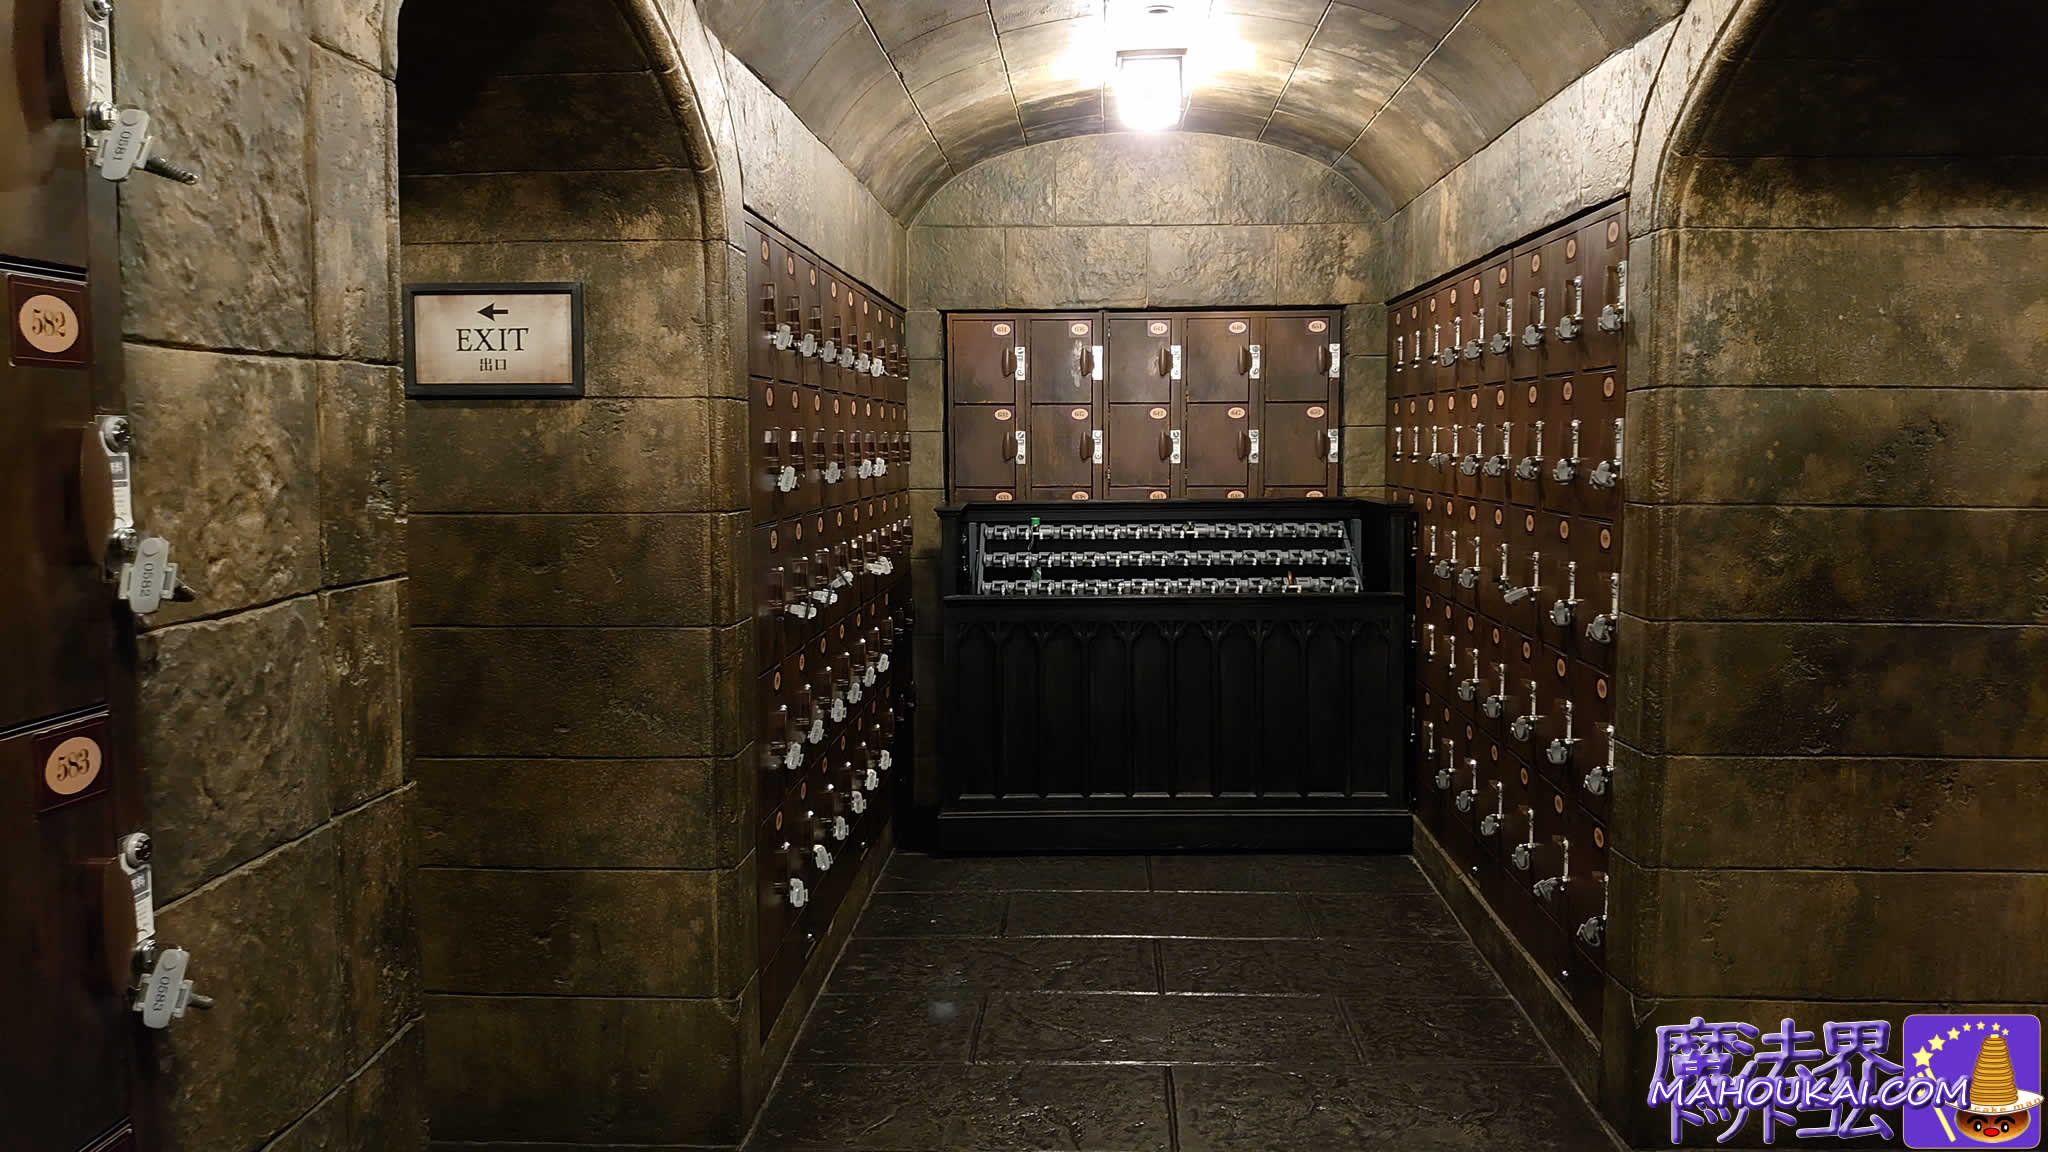 PHOTOS: Take a Tour of the New Forbidden Journey Lockers at